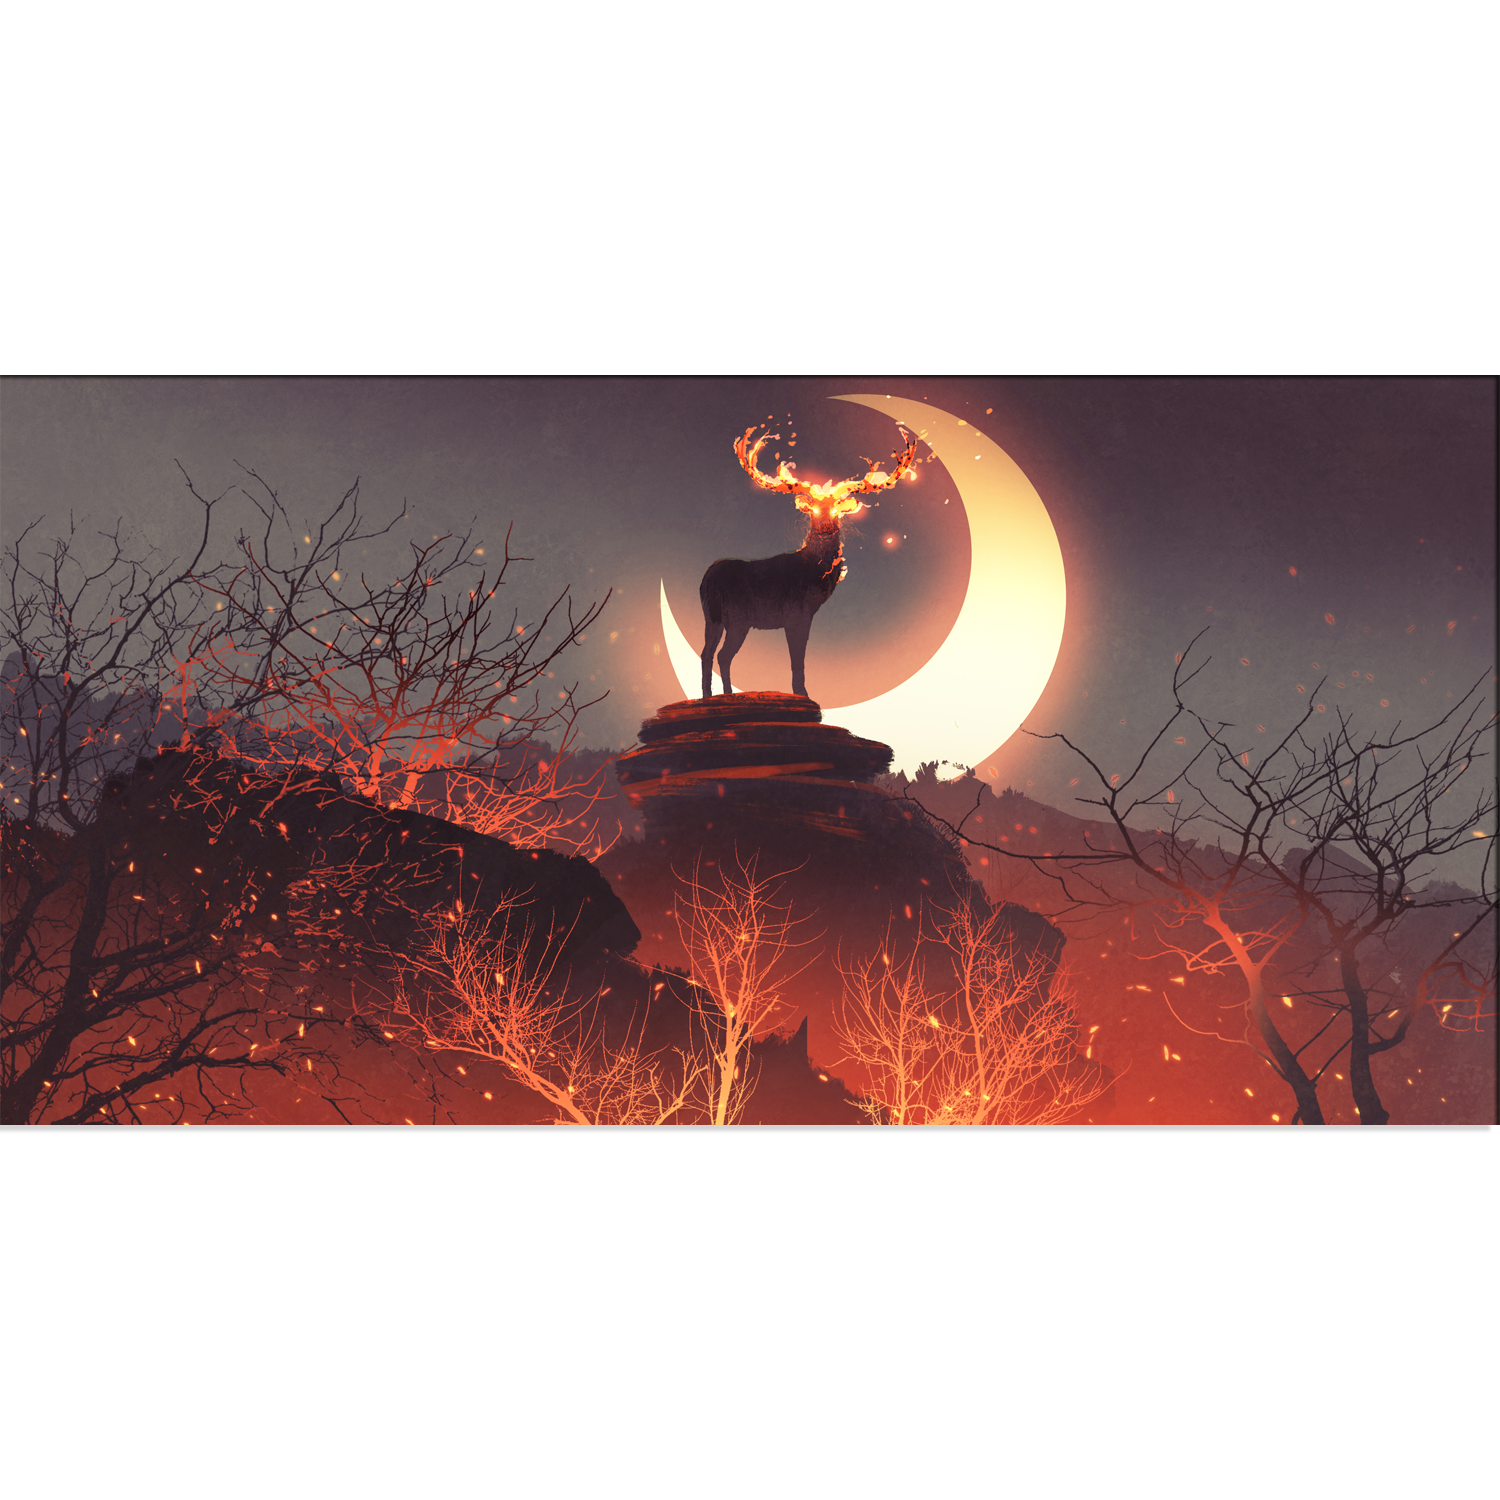 The deer standing on rocks in forest fire Canvas Print Wall Painting